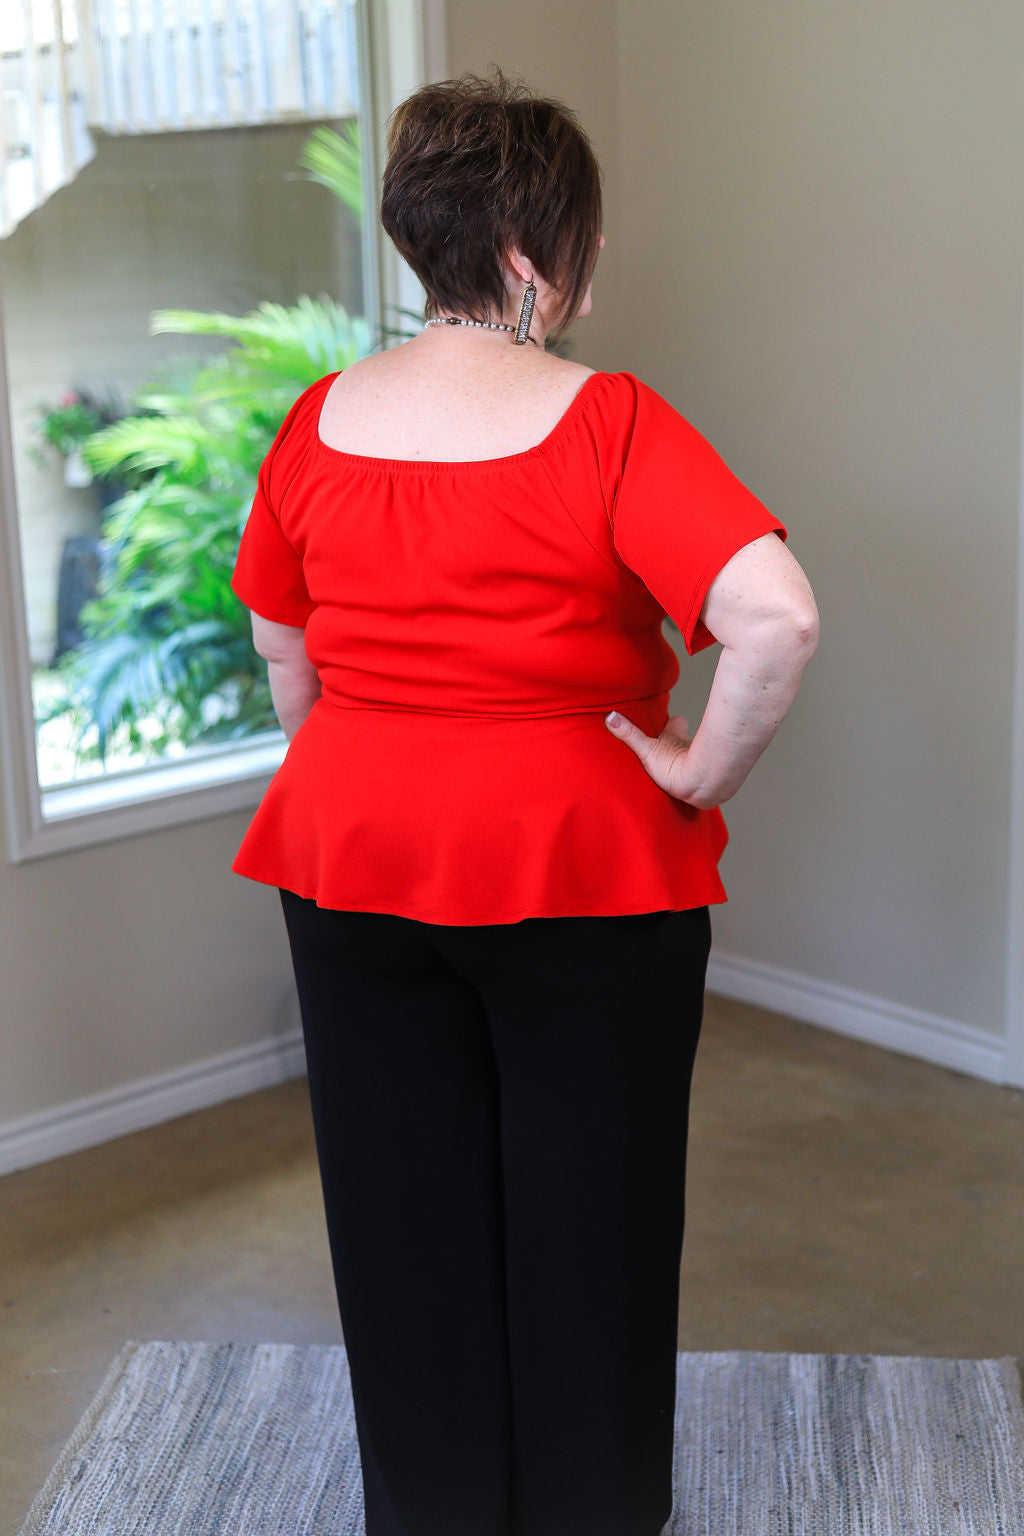 Last Chance Size 3XL | Plus Size | Time And Again Short Sleeve Peplum Top in Red - Giddy Up Glamour Boutique